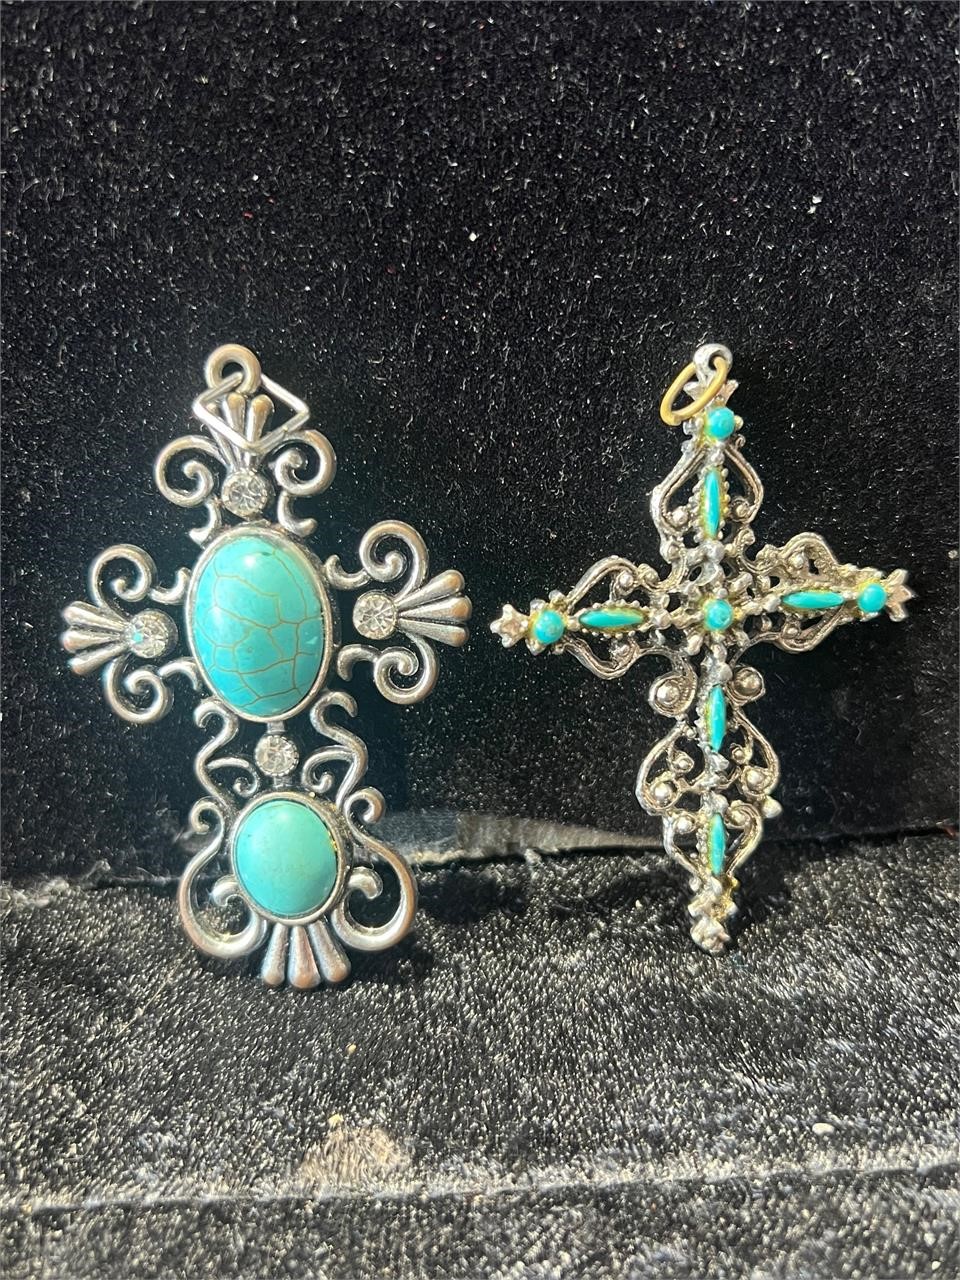 JEWELRY, MILITARY, VINTAGE & MORE EMORY, TX